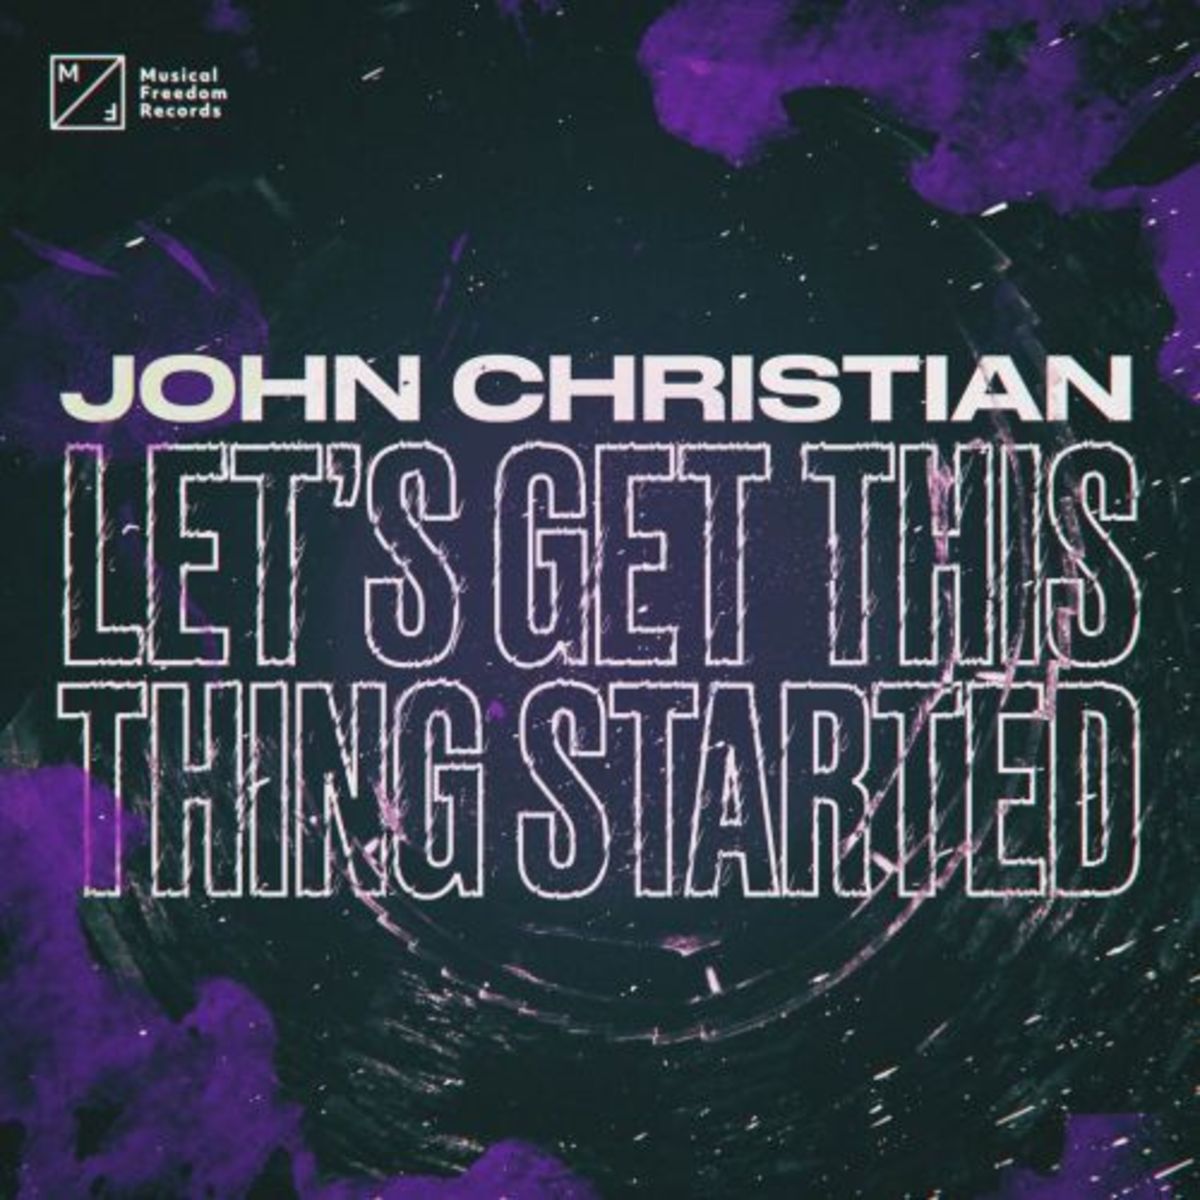 John Christian - "Let's Get This Thing Started" - Released on Tiesto's Musical Freedom Records (EDM.com Feature)